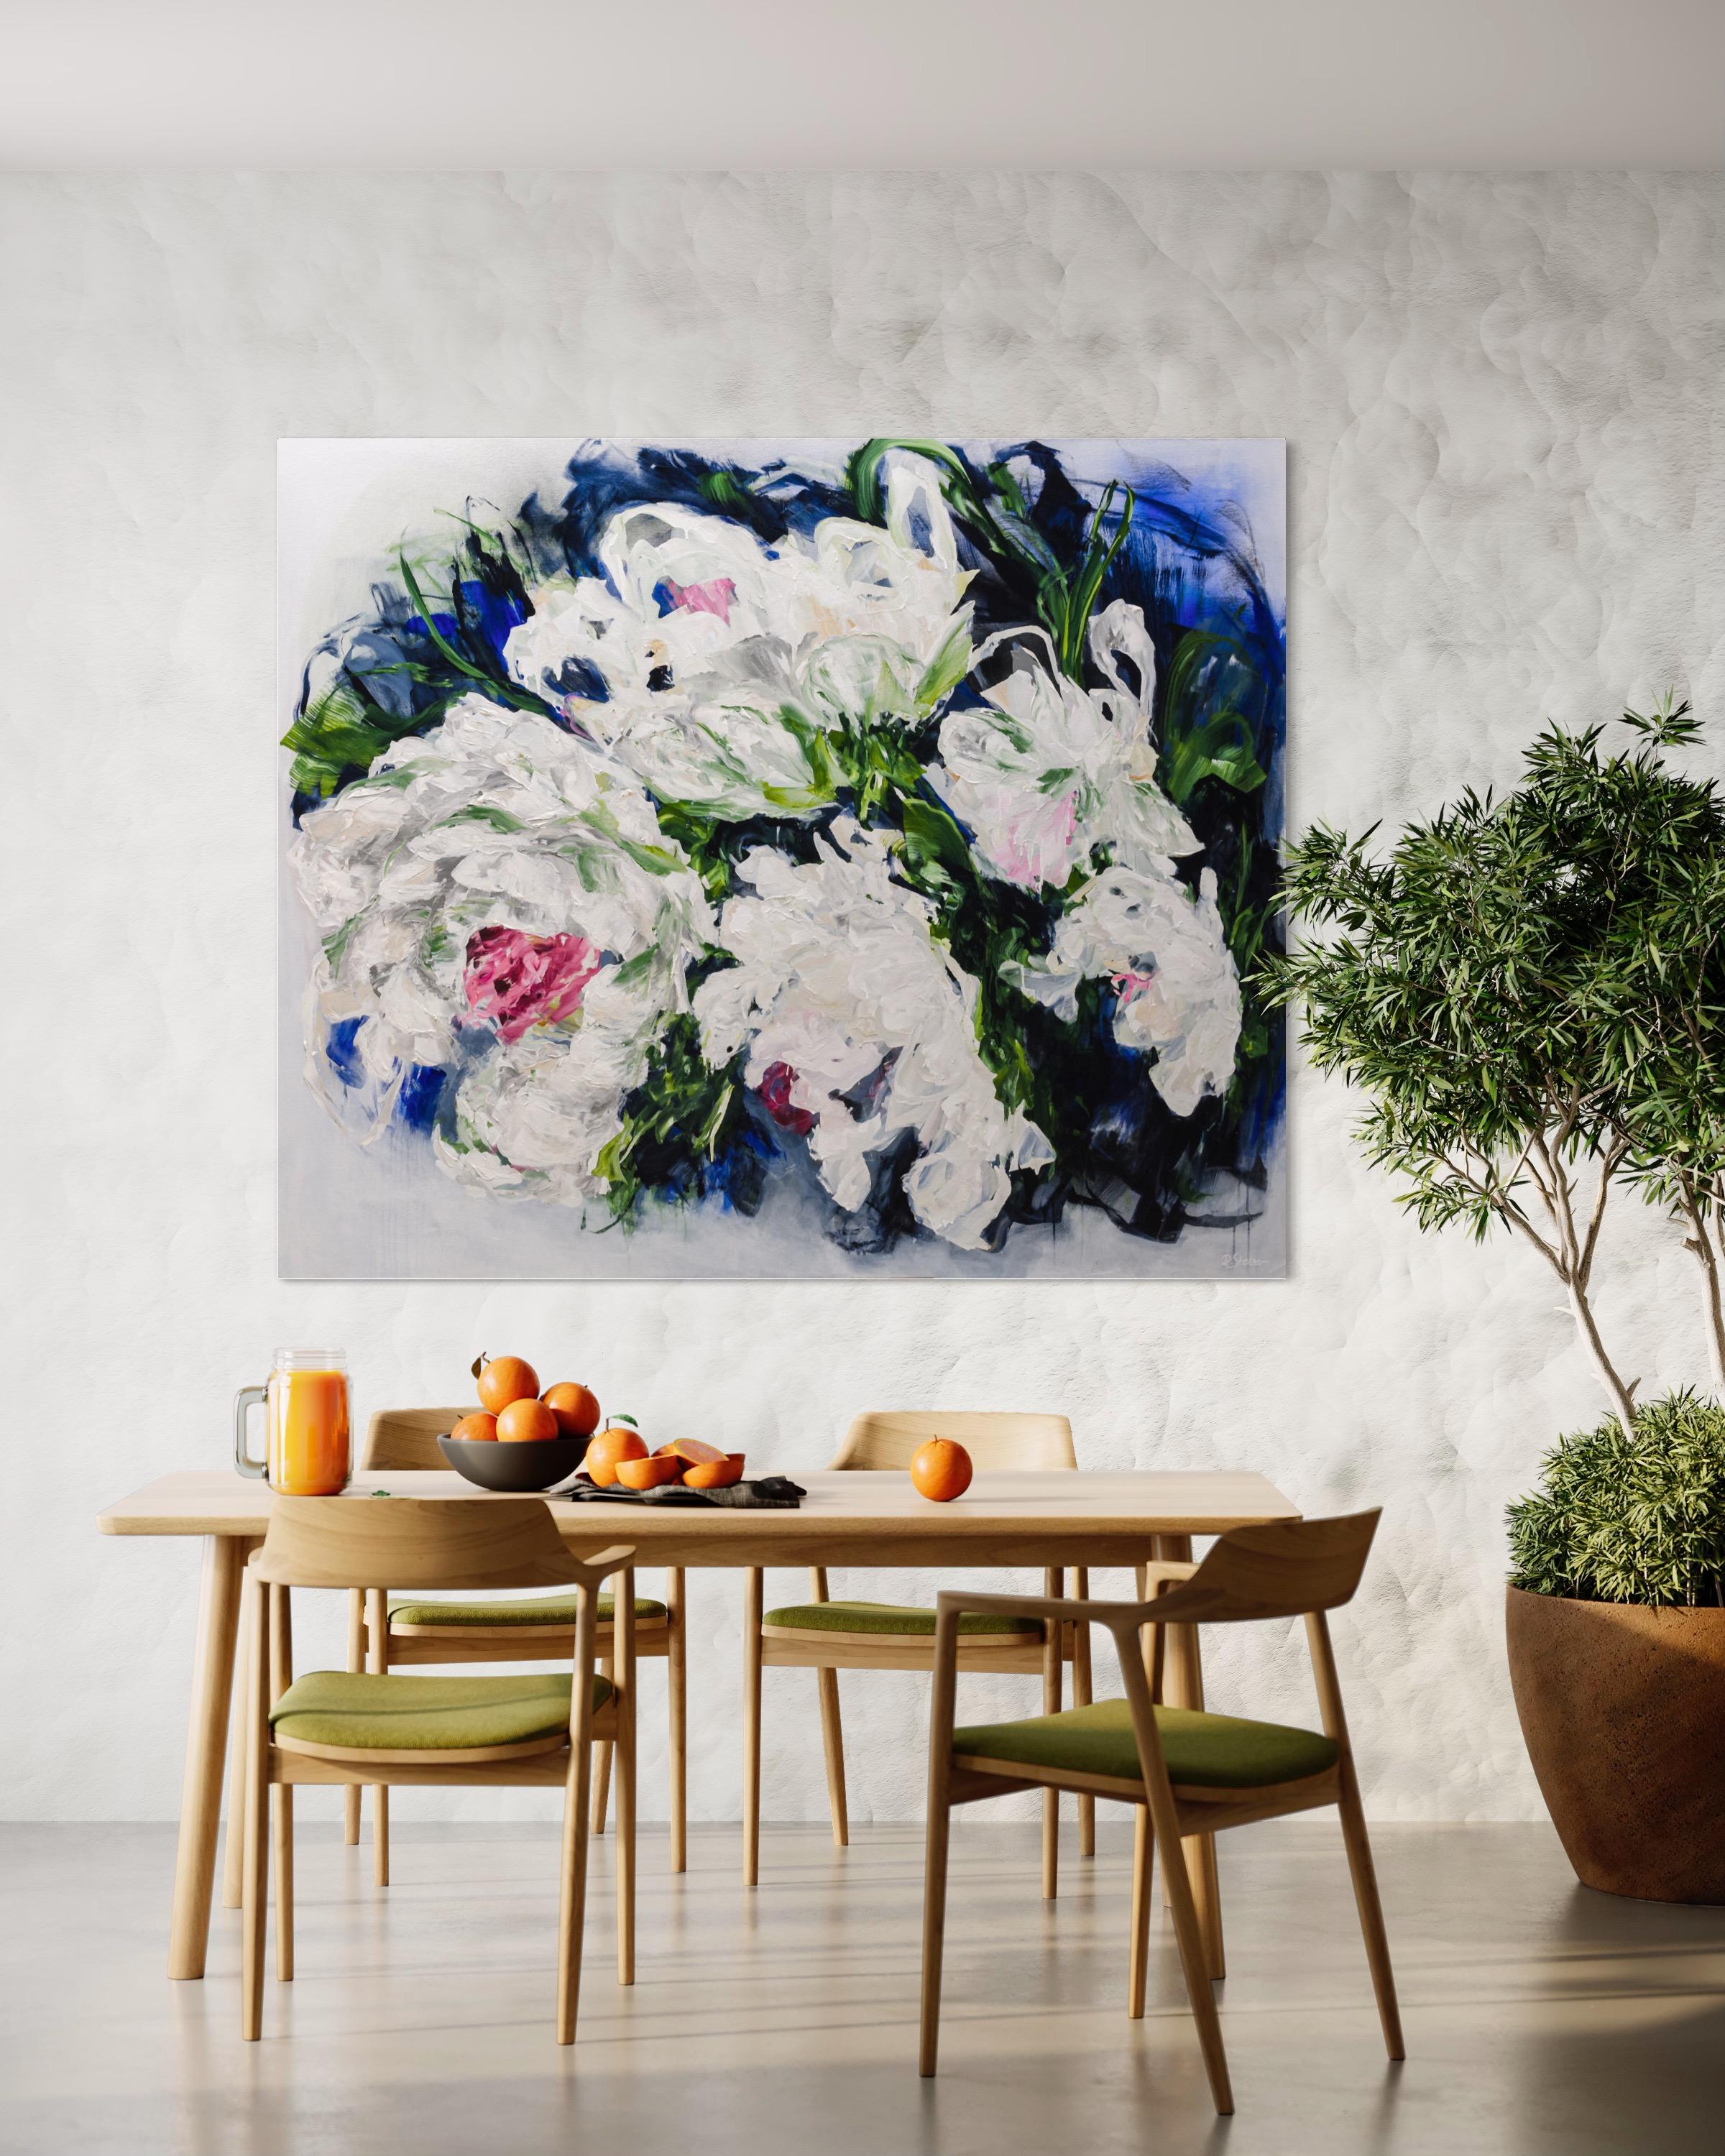 Break into Blossom 1 - Abstract Painting by Ramona Stelzer